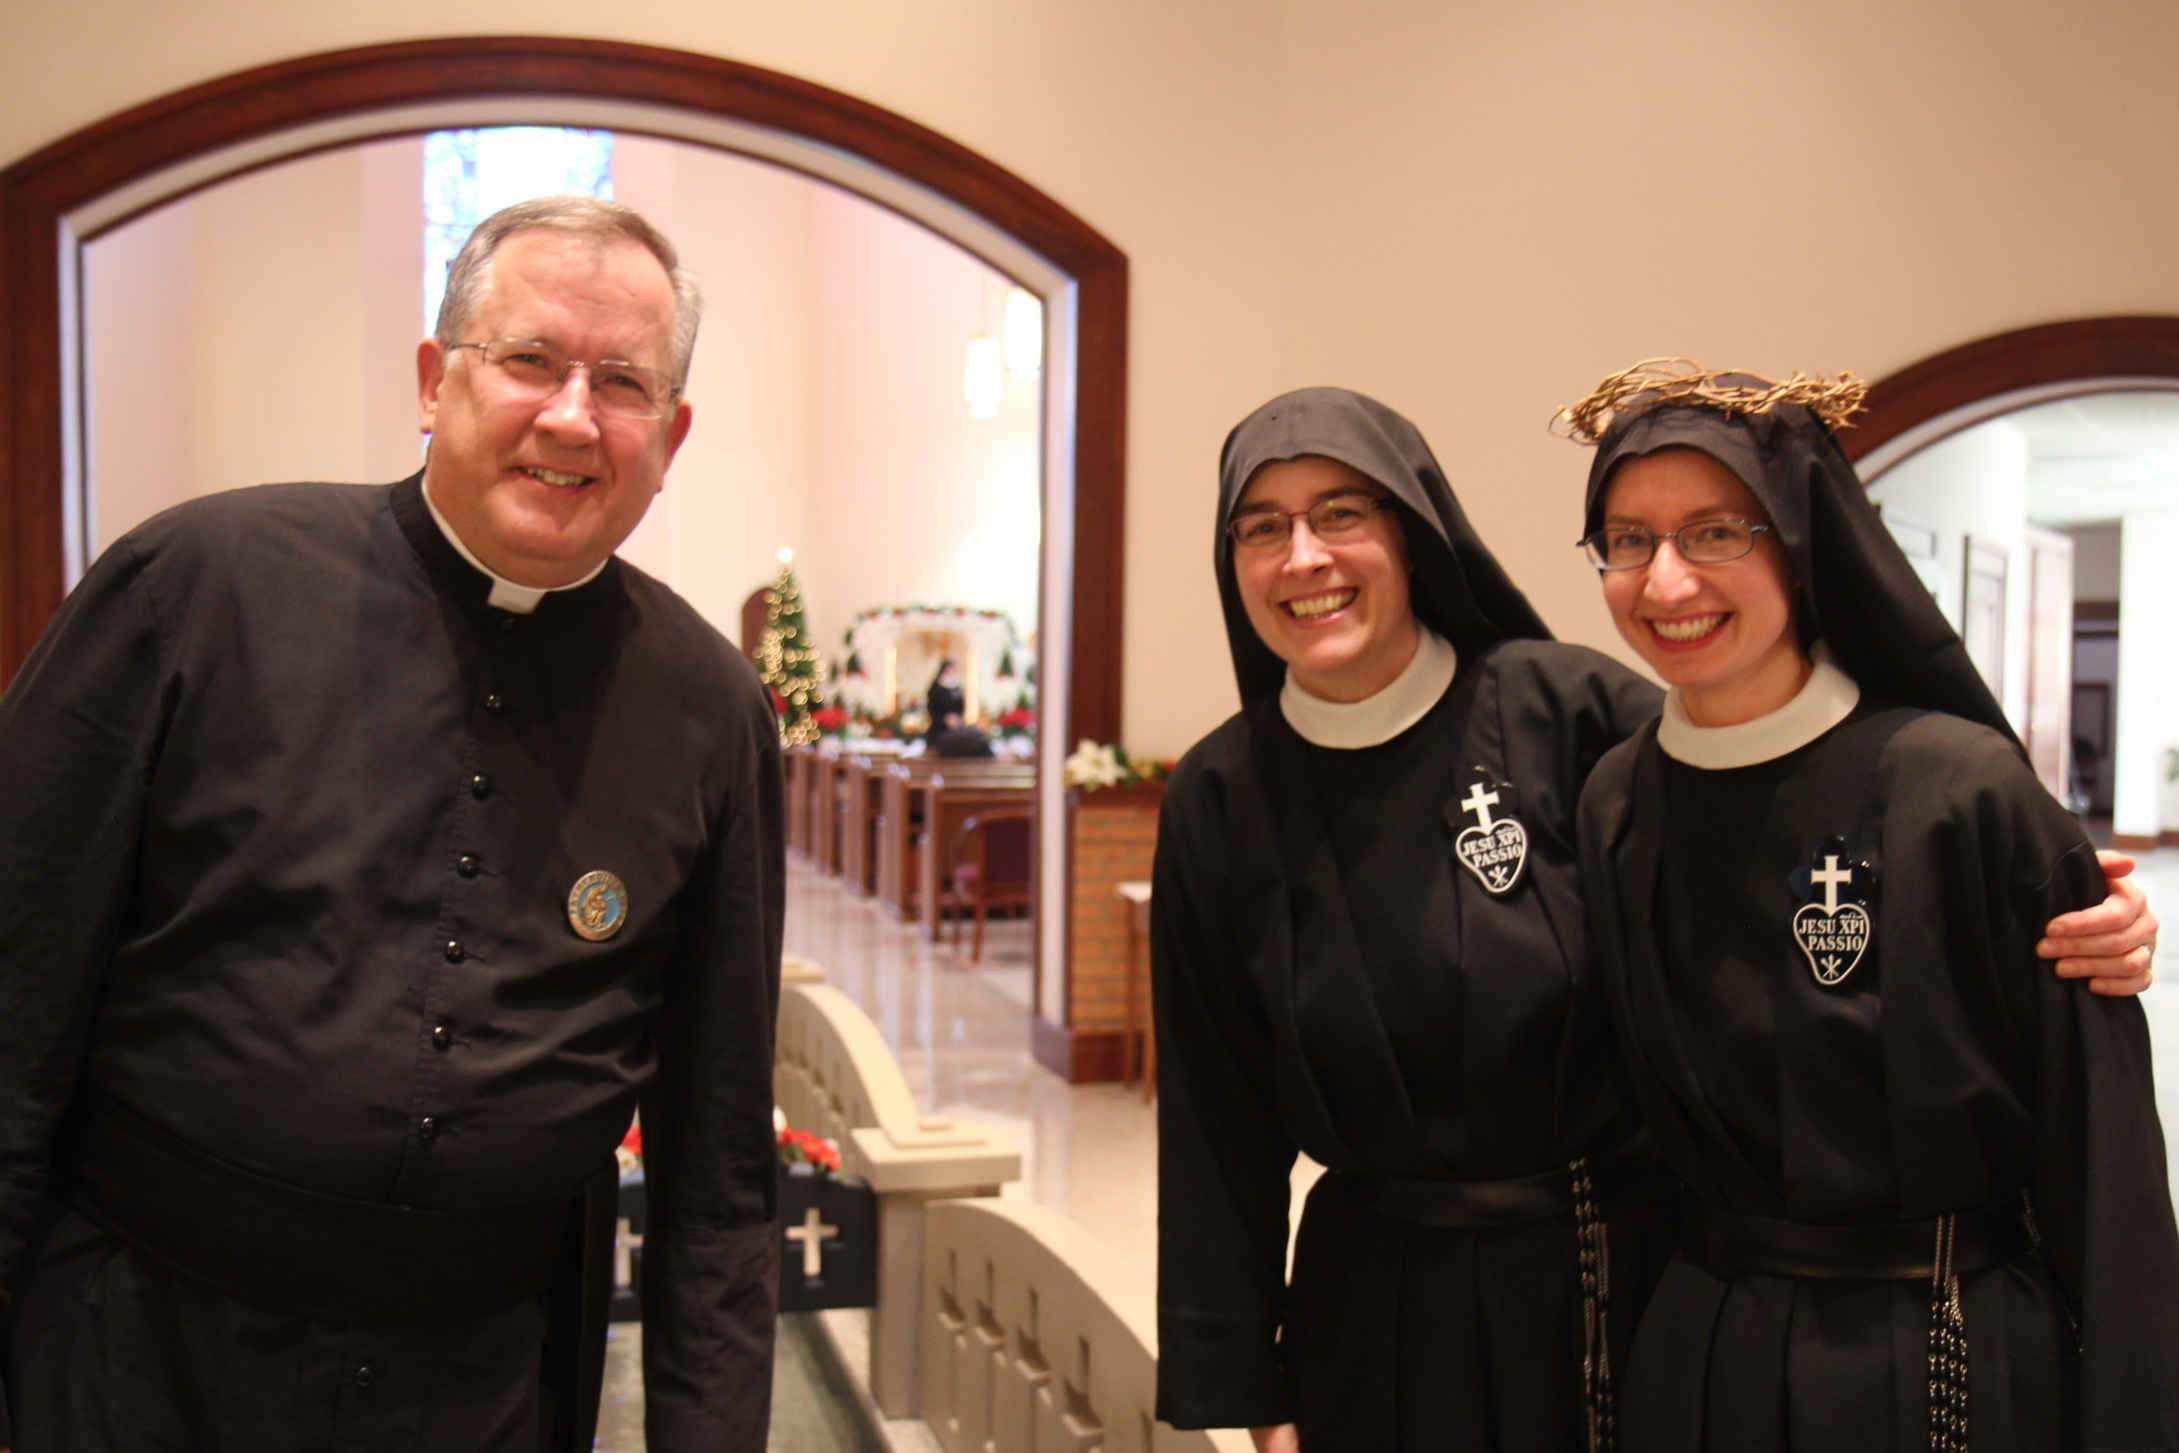  Fr. David Wilton, CPM, Mother John Mary, and Sr. Cecilia Maria after the Mass 